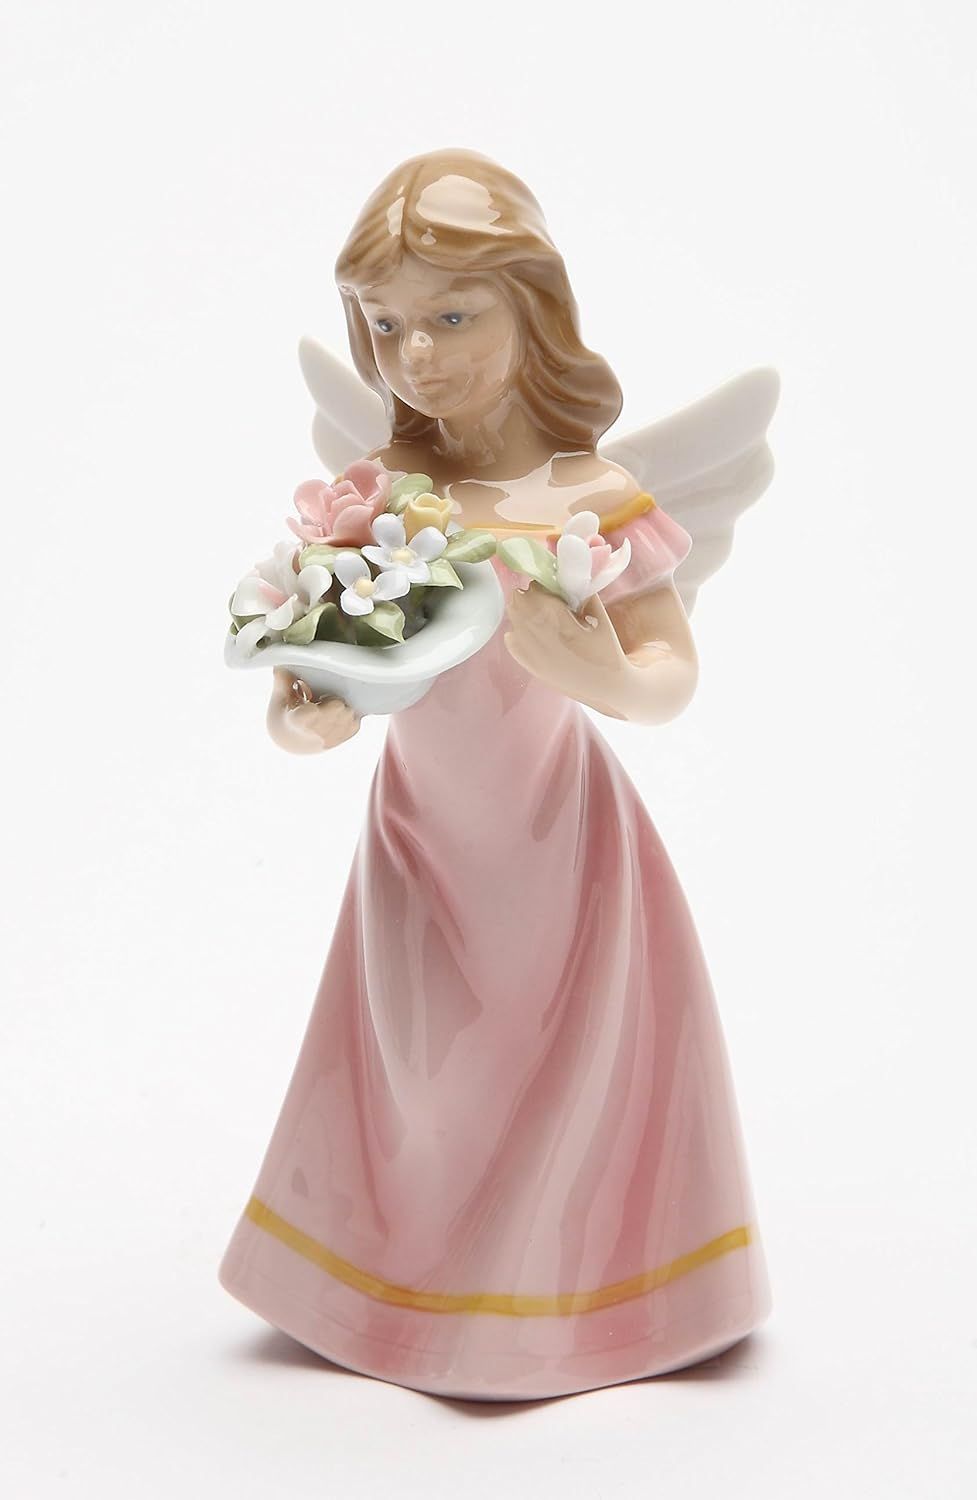 Cosmos Gifts 20861 Angel in Pink Dress Holding Flowers Ceramic Figurine, 5-3/8-Inch | Amazon (US)